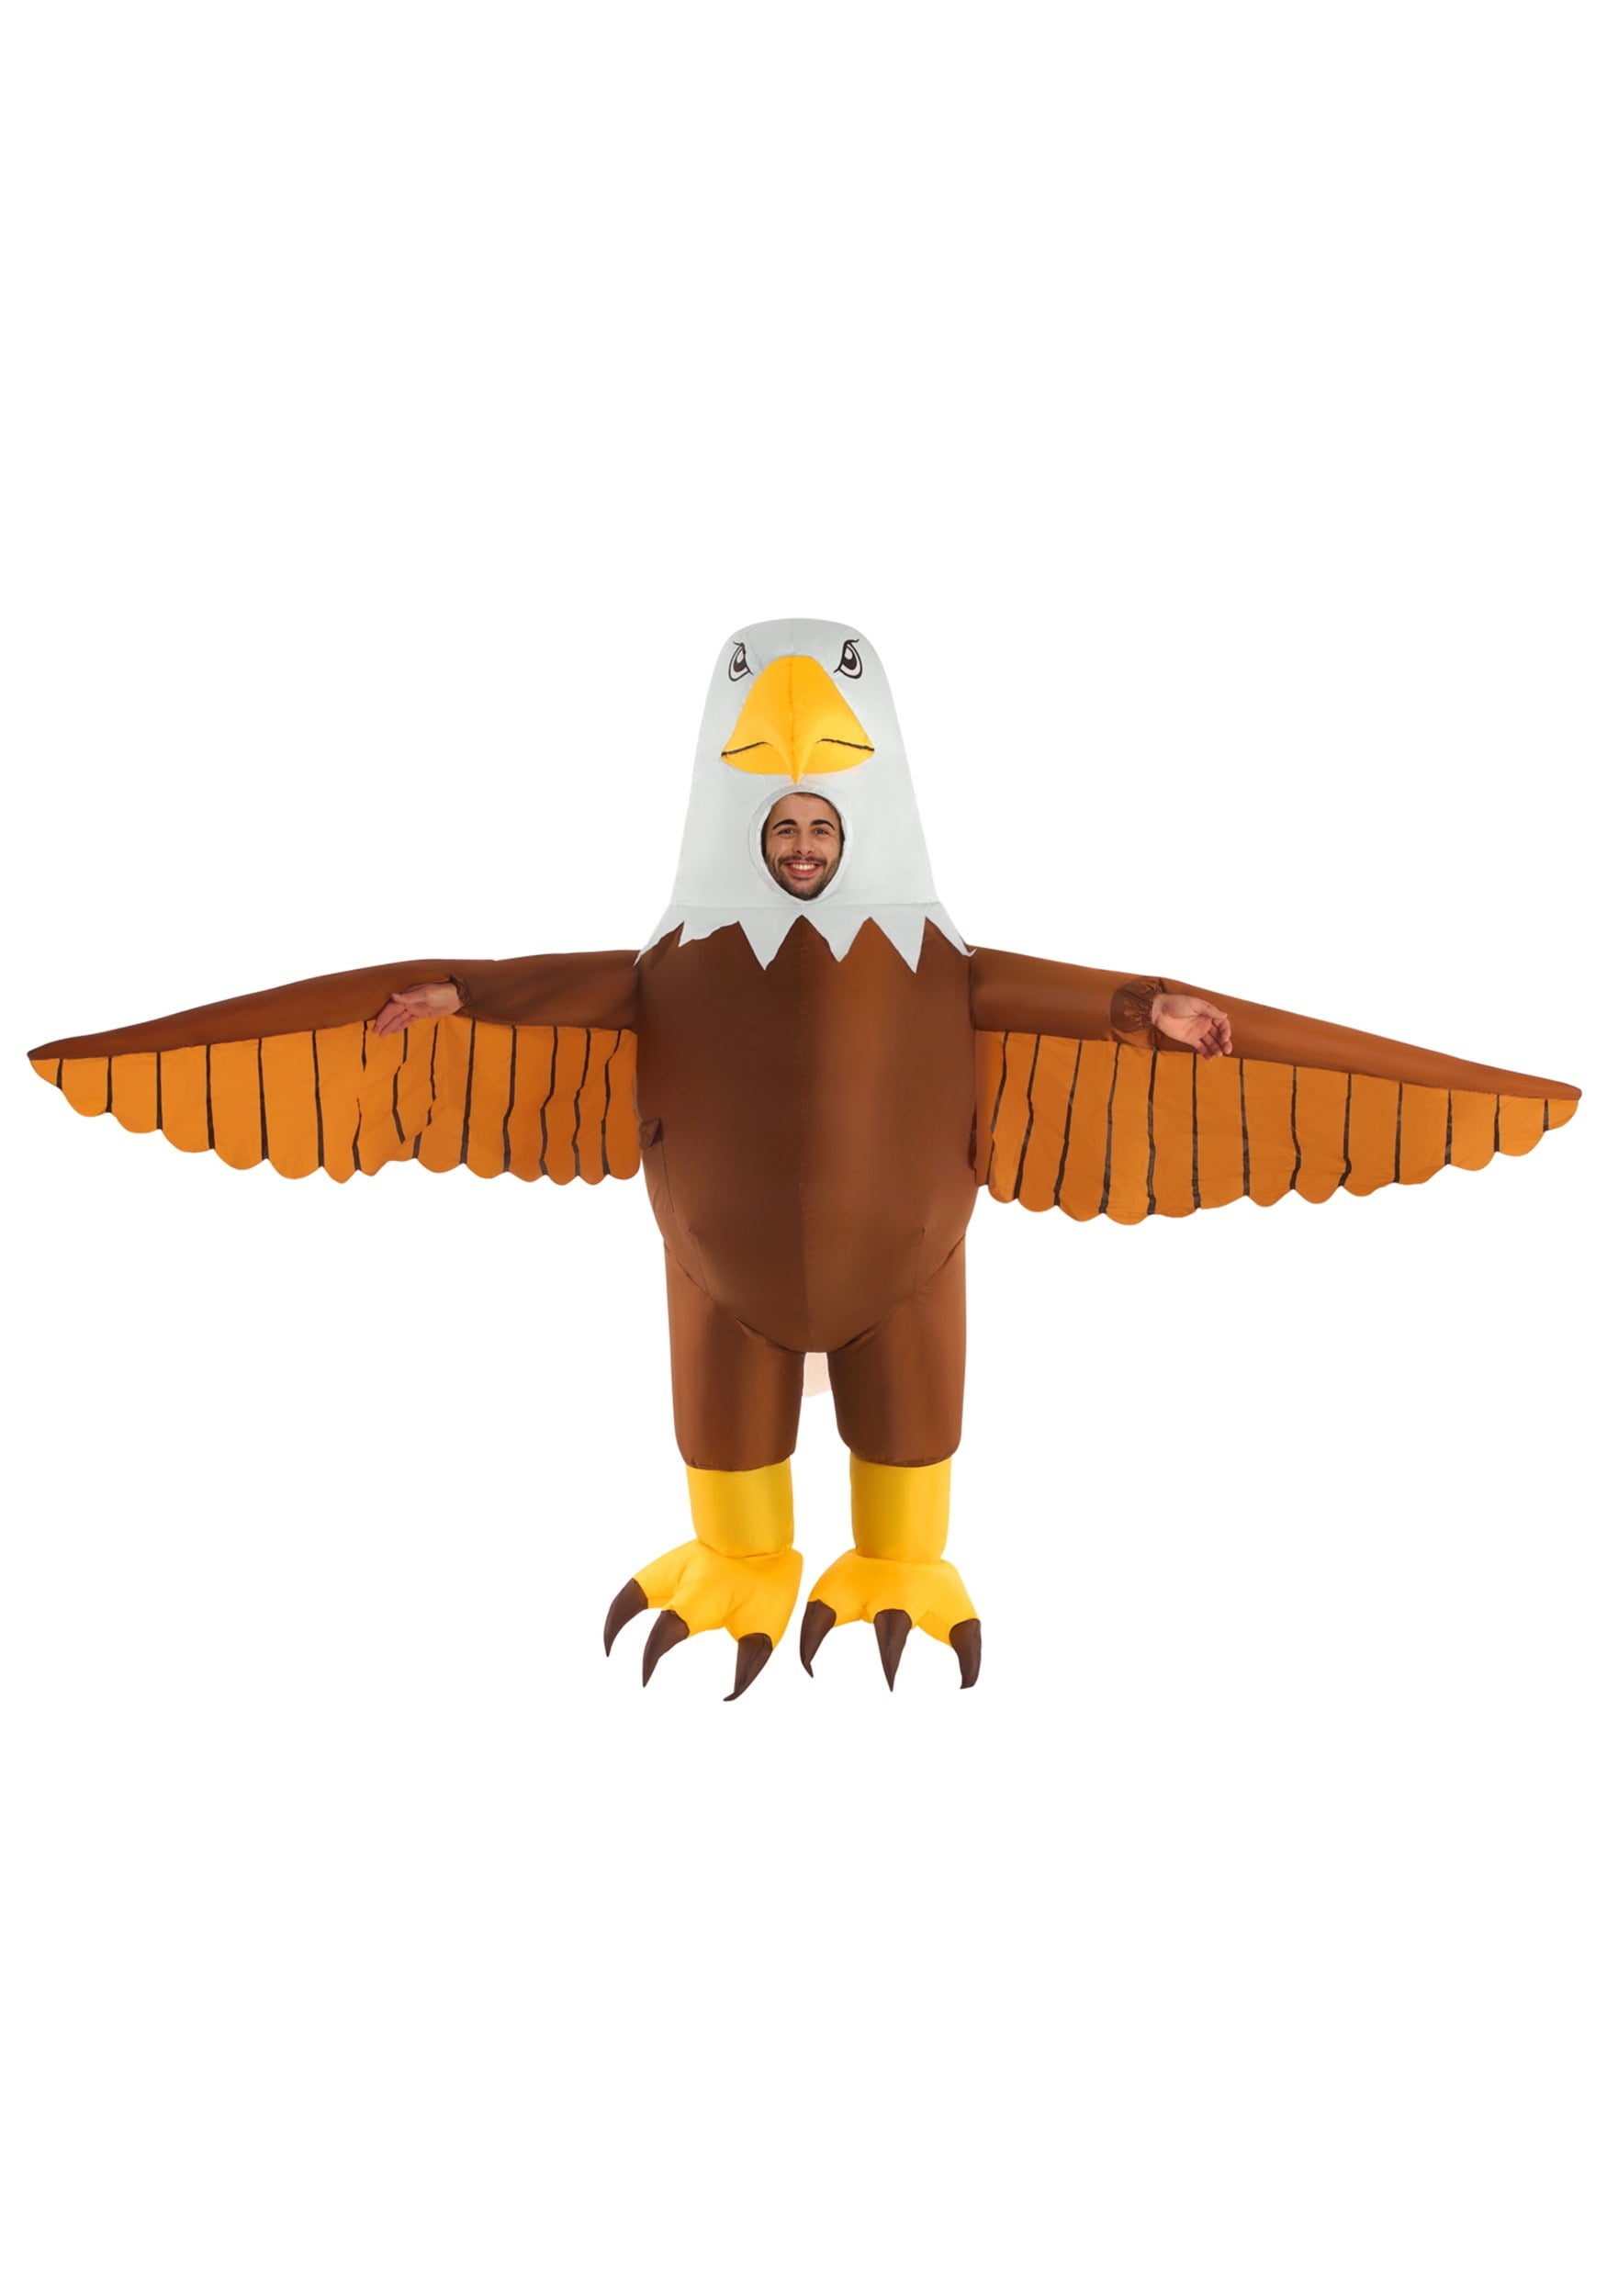 FANQIDM Zone Inflatable Bald Eagle Costume for Adult Funny Halloween  Costumes Cosplay Fantasy Costume Party (Color : Yellow, Size : Adults)